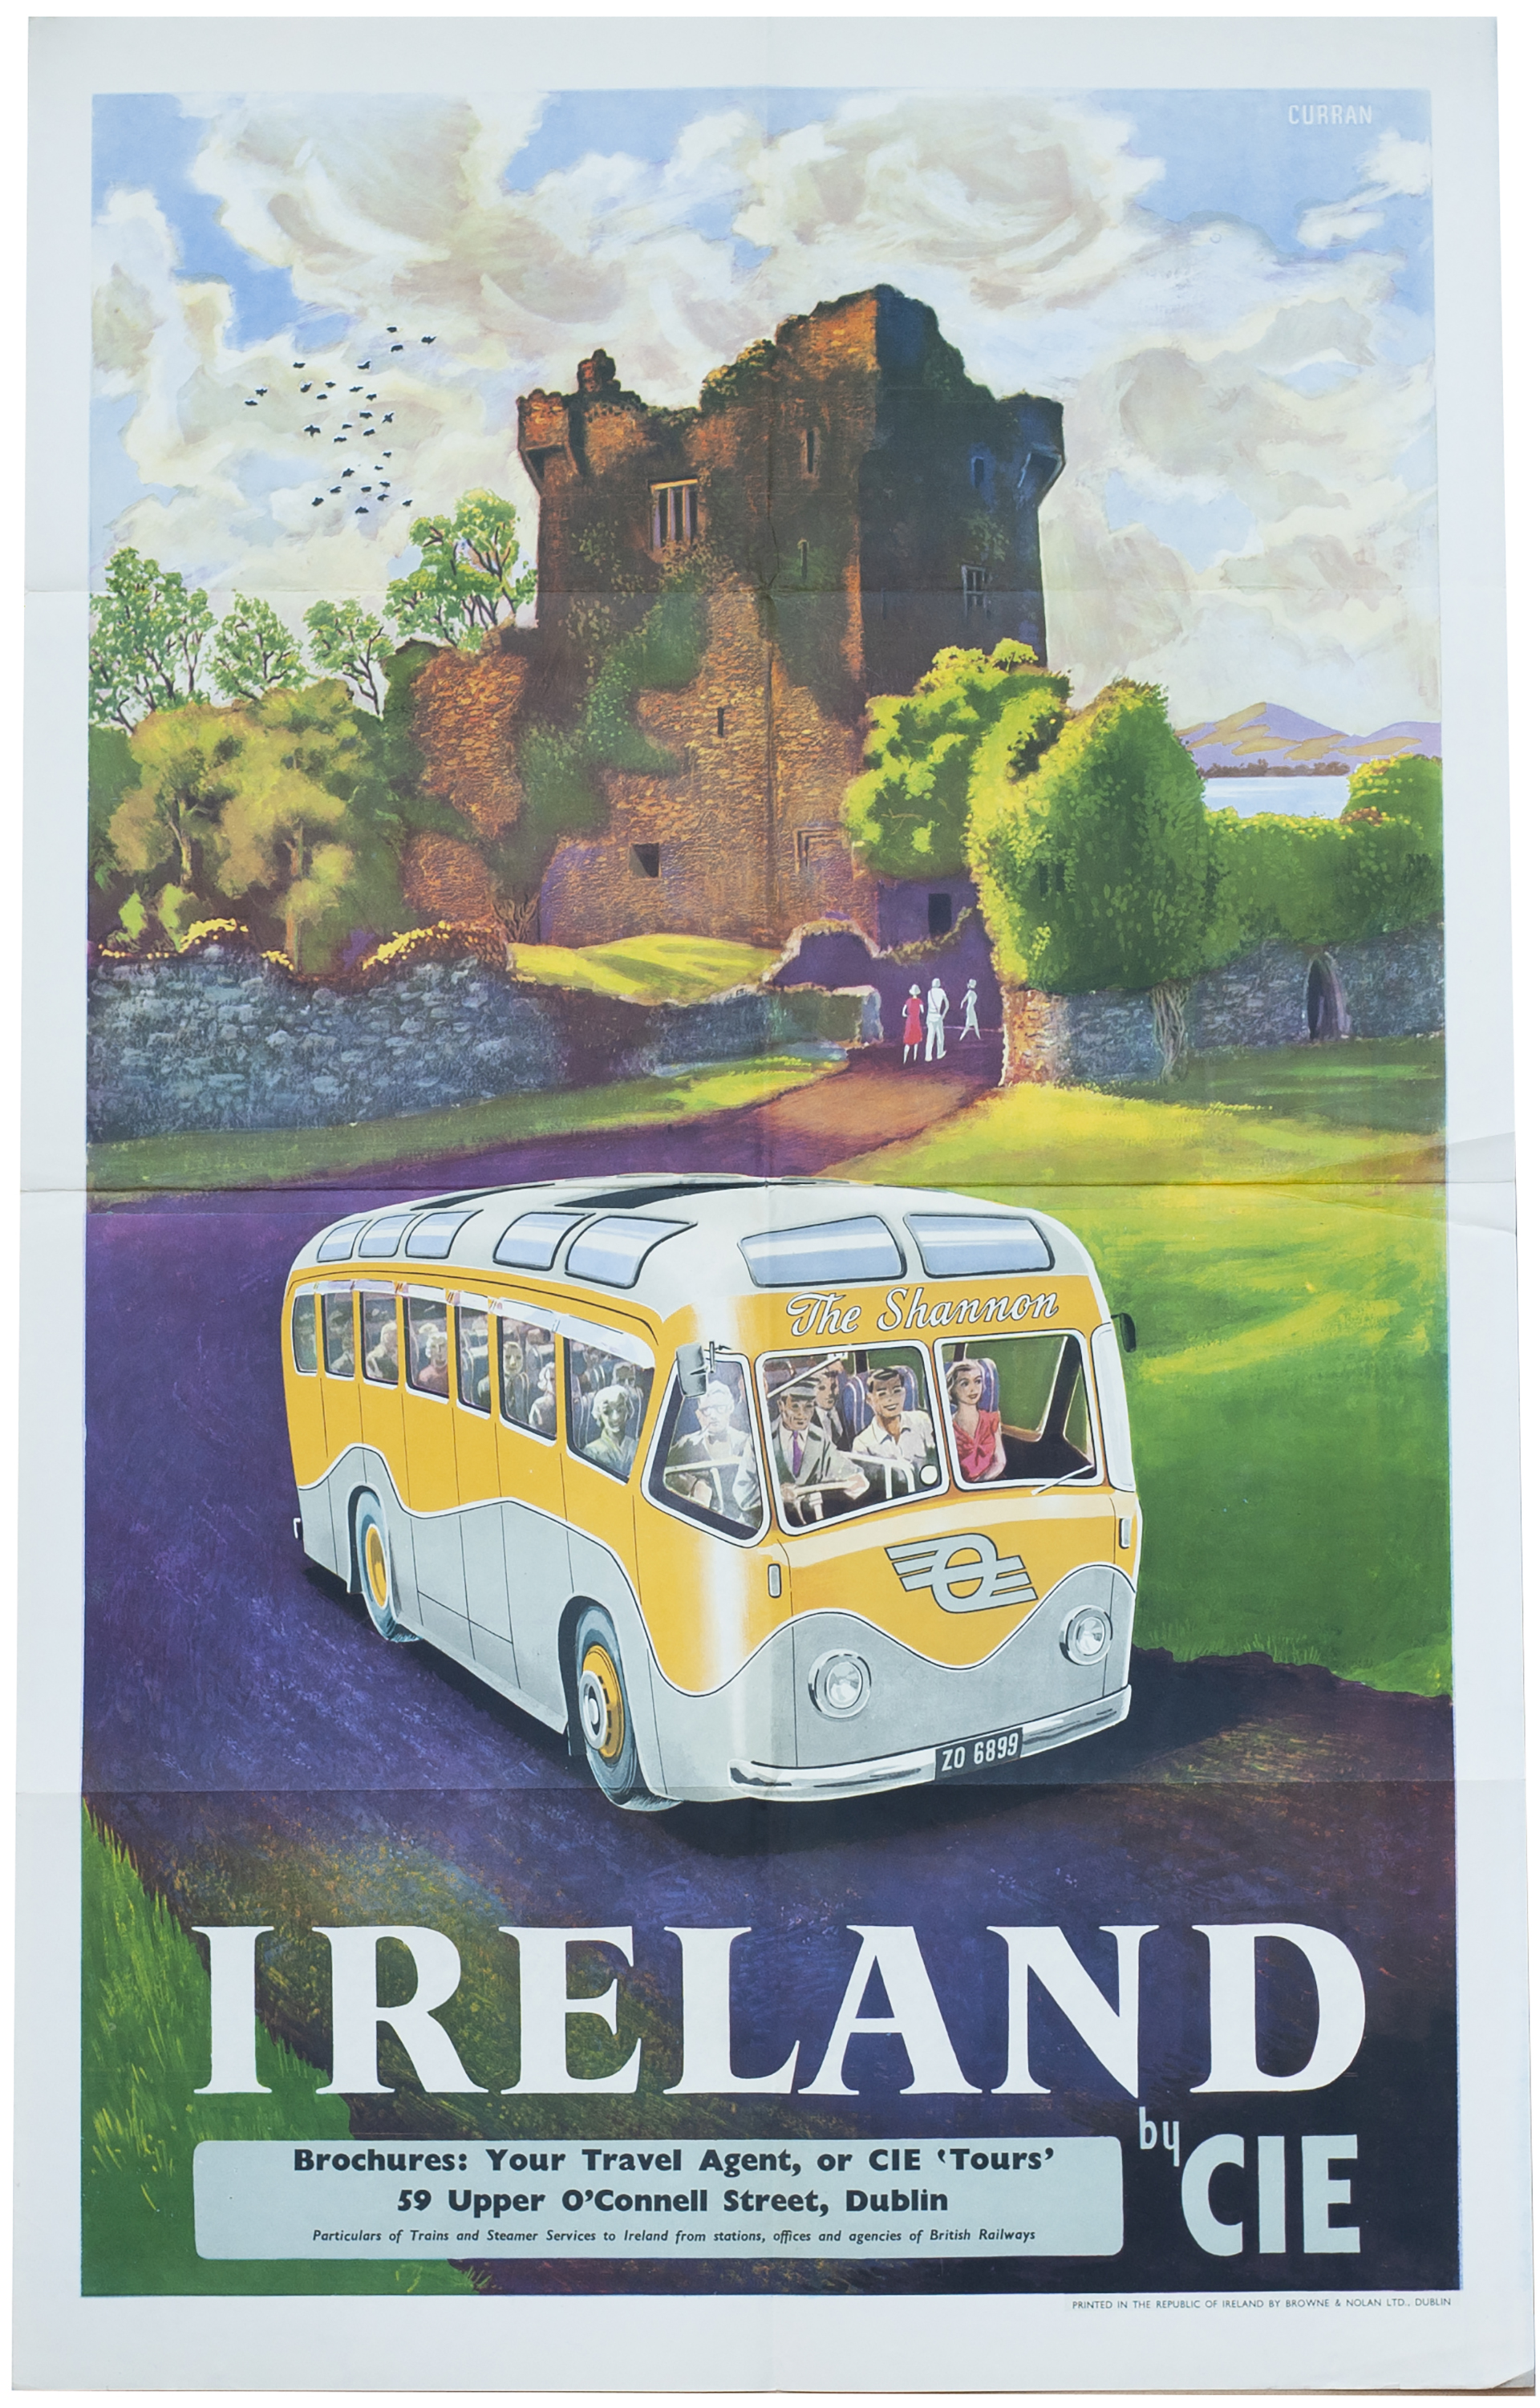 Poster CIE IRELAND BY CIE by Curran. Double Royal 25in x 40in. In excellent condition.